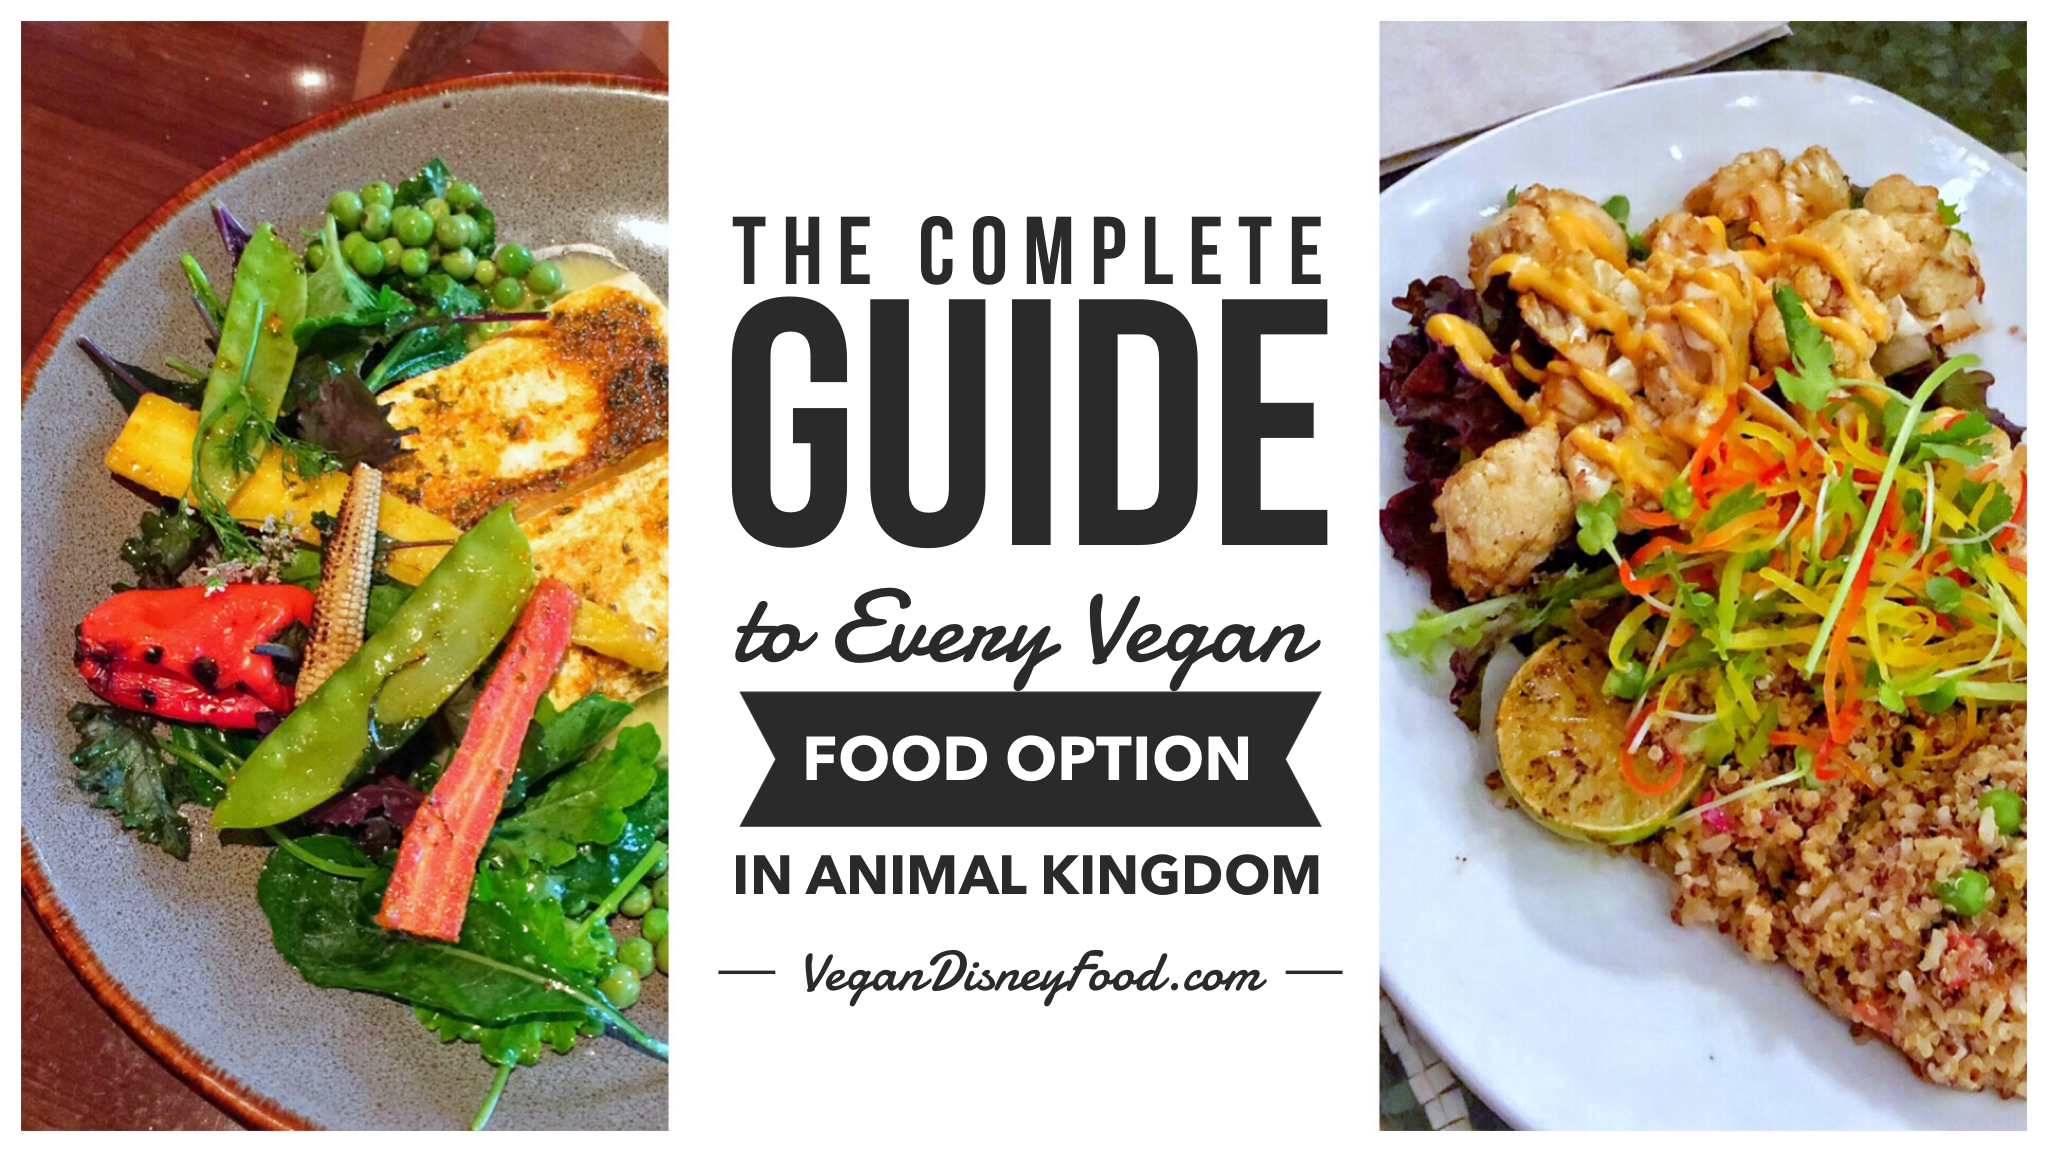 What’s Vegan in Disney’s Animal Kingdom? - The Complete Guide to Every Vegan Food Option in the Animal Kingdom theme park